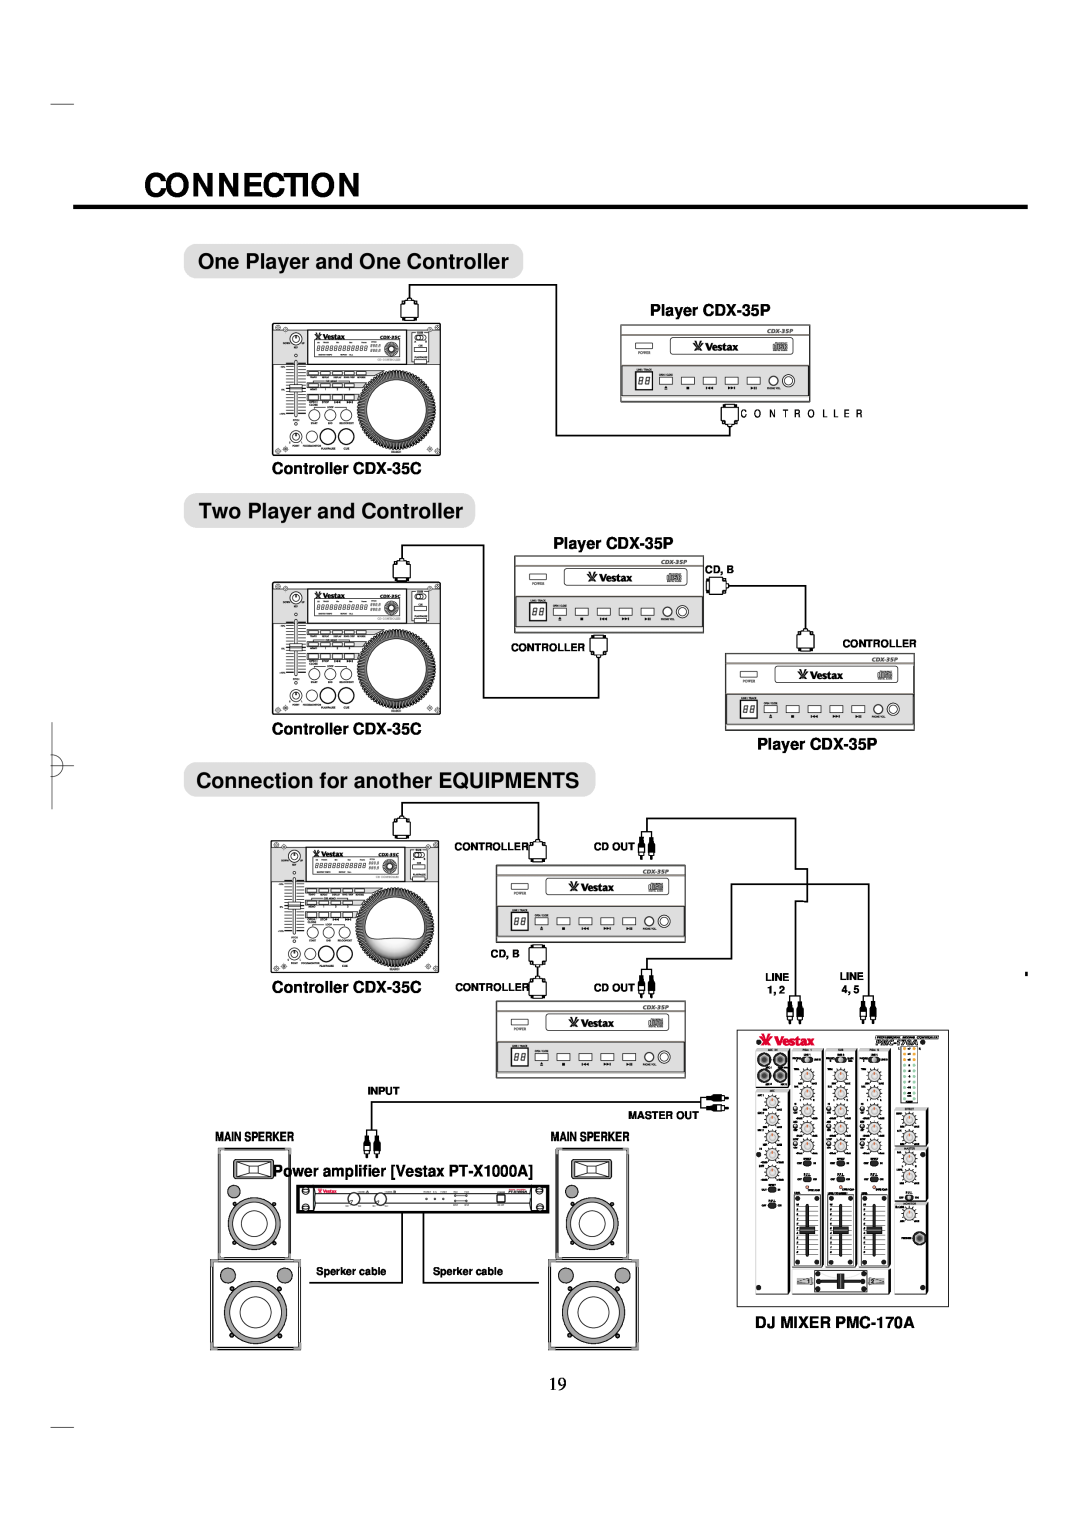 Vestax One Player and One Controller, Two Player and Controller, Connection for another EQUIPMENTS, Player CDX-35P 